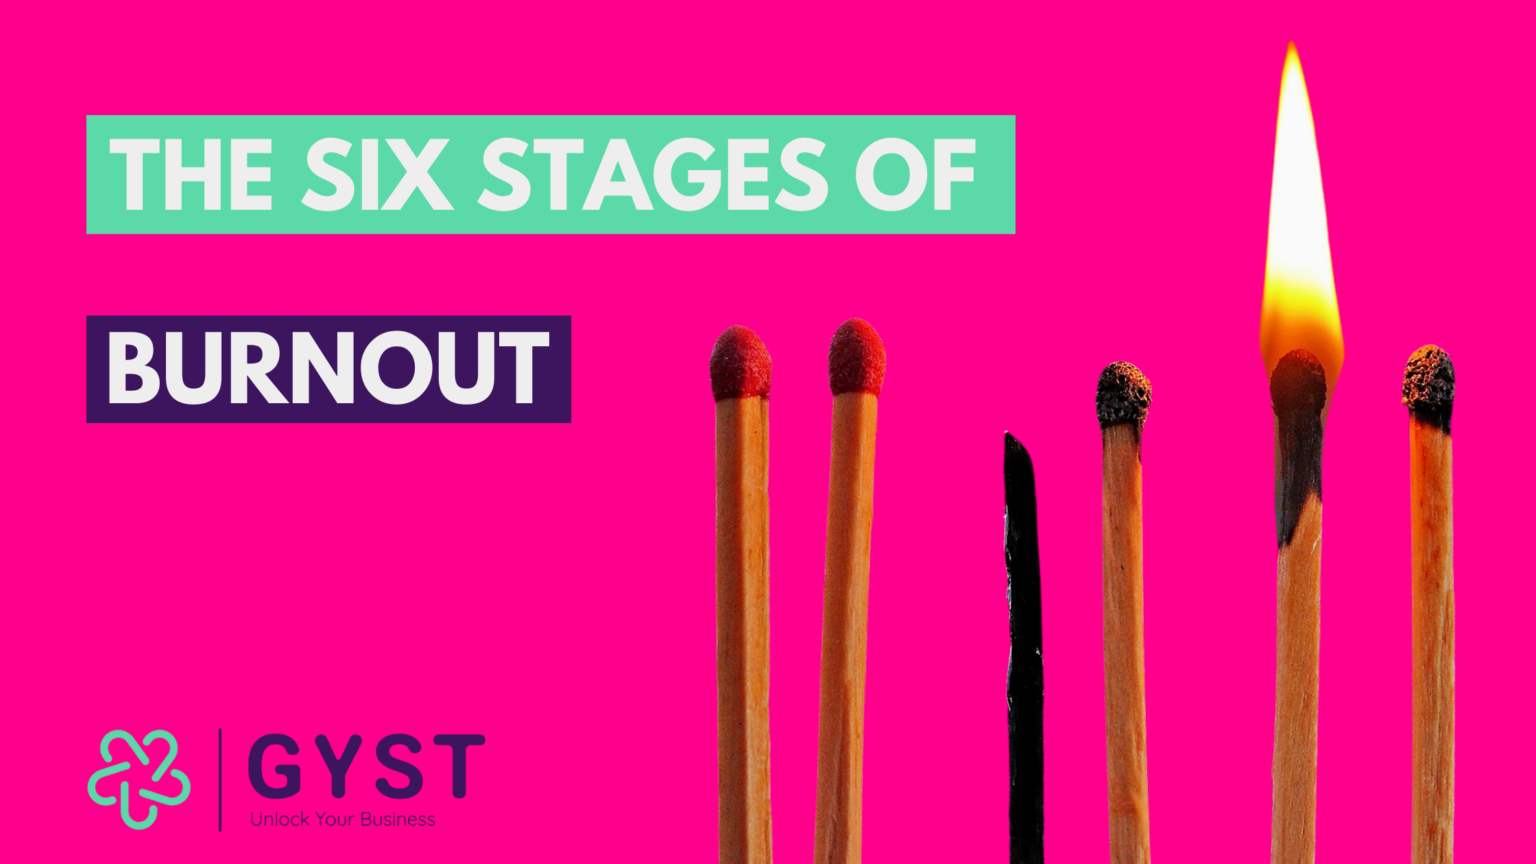 The Six Stages of Burnout, Burnout at work, workplace wellbeing, gyst wellbeing, business consultant uk